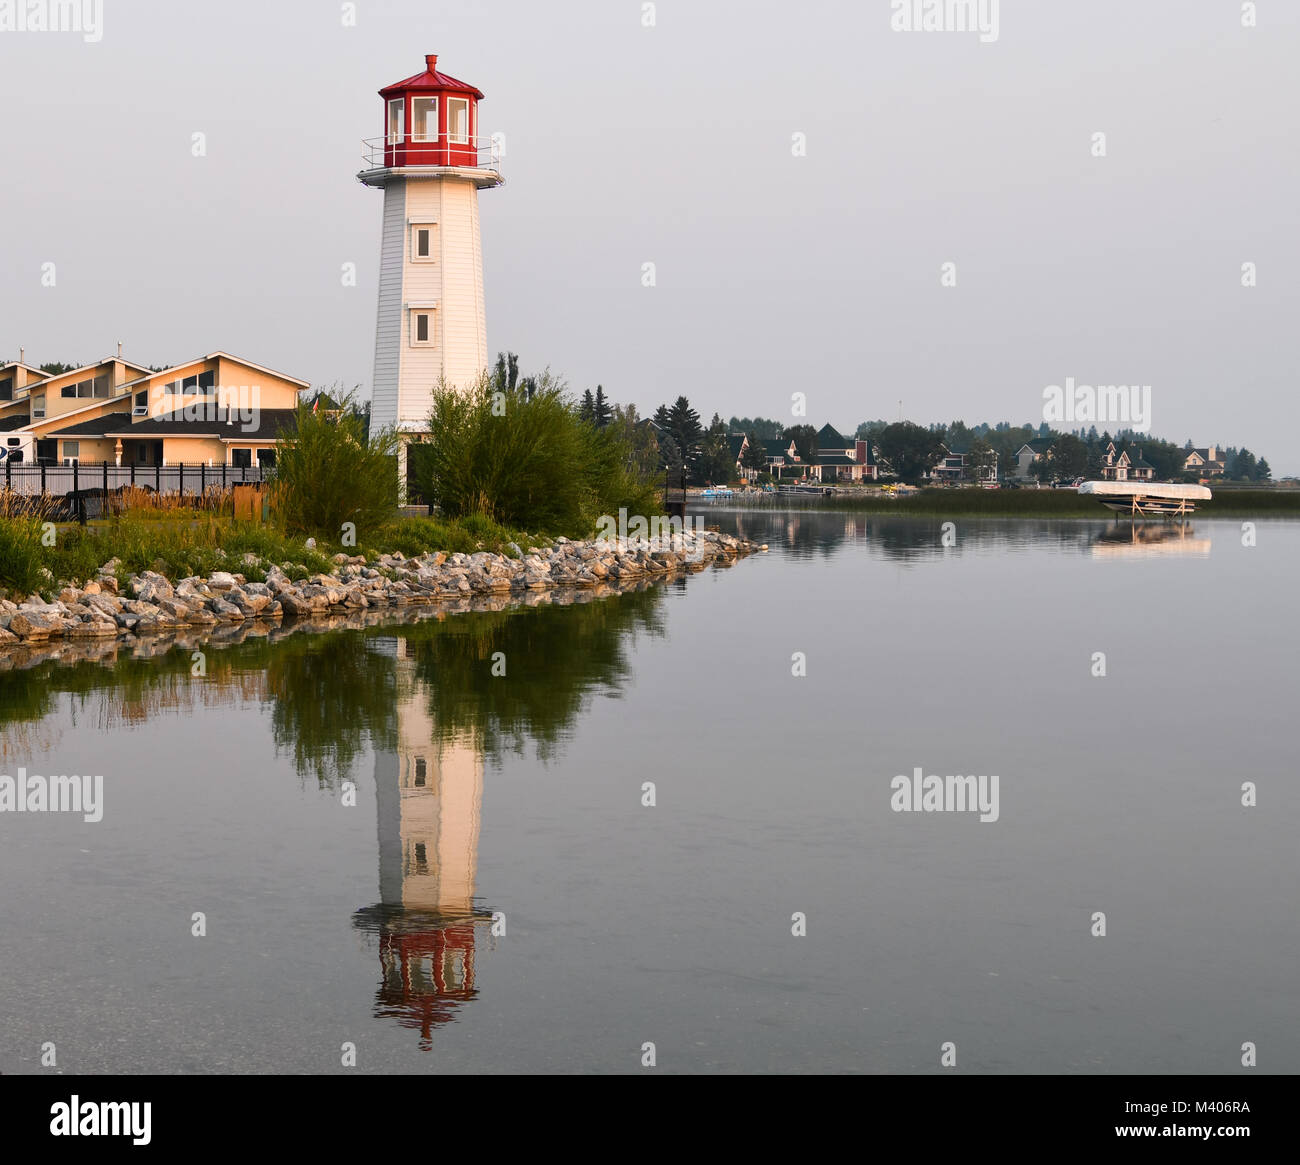 Beautiful Red and White Lighthouse with Reflections on the Water in Sylvan Lake, Alberta, Canada Stock Photo